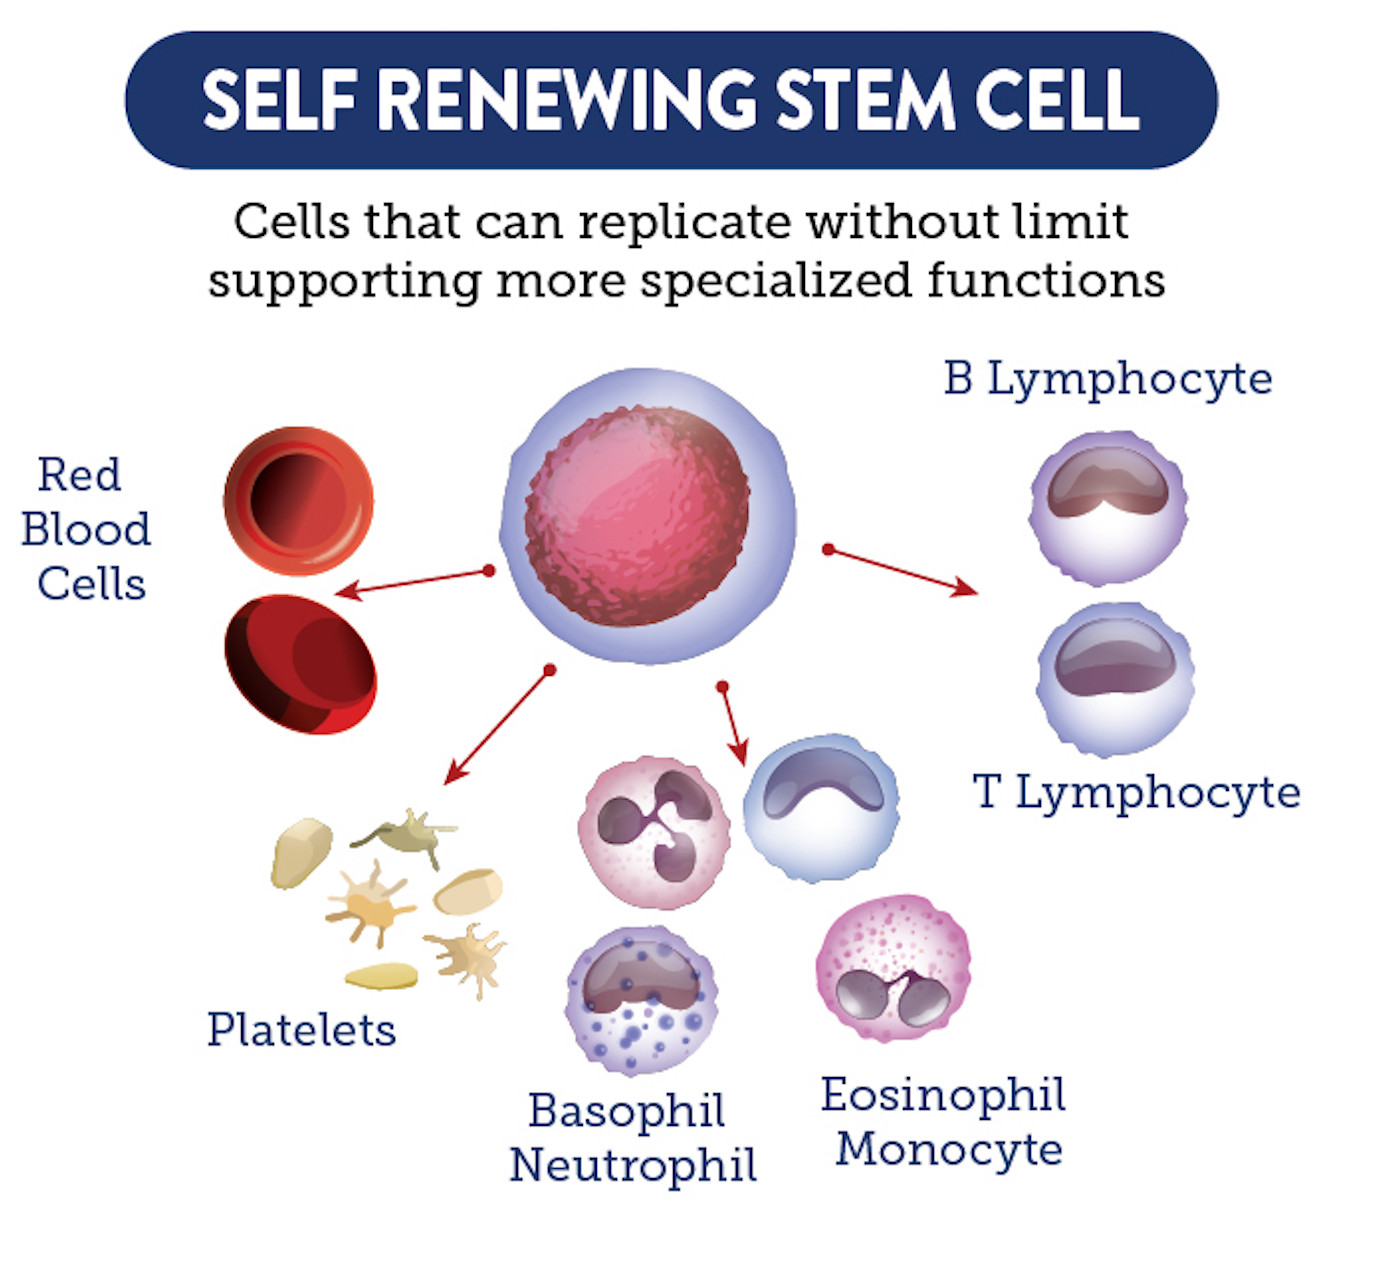 An illustration showing how stem cells renew cells